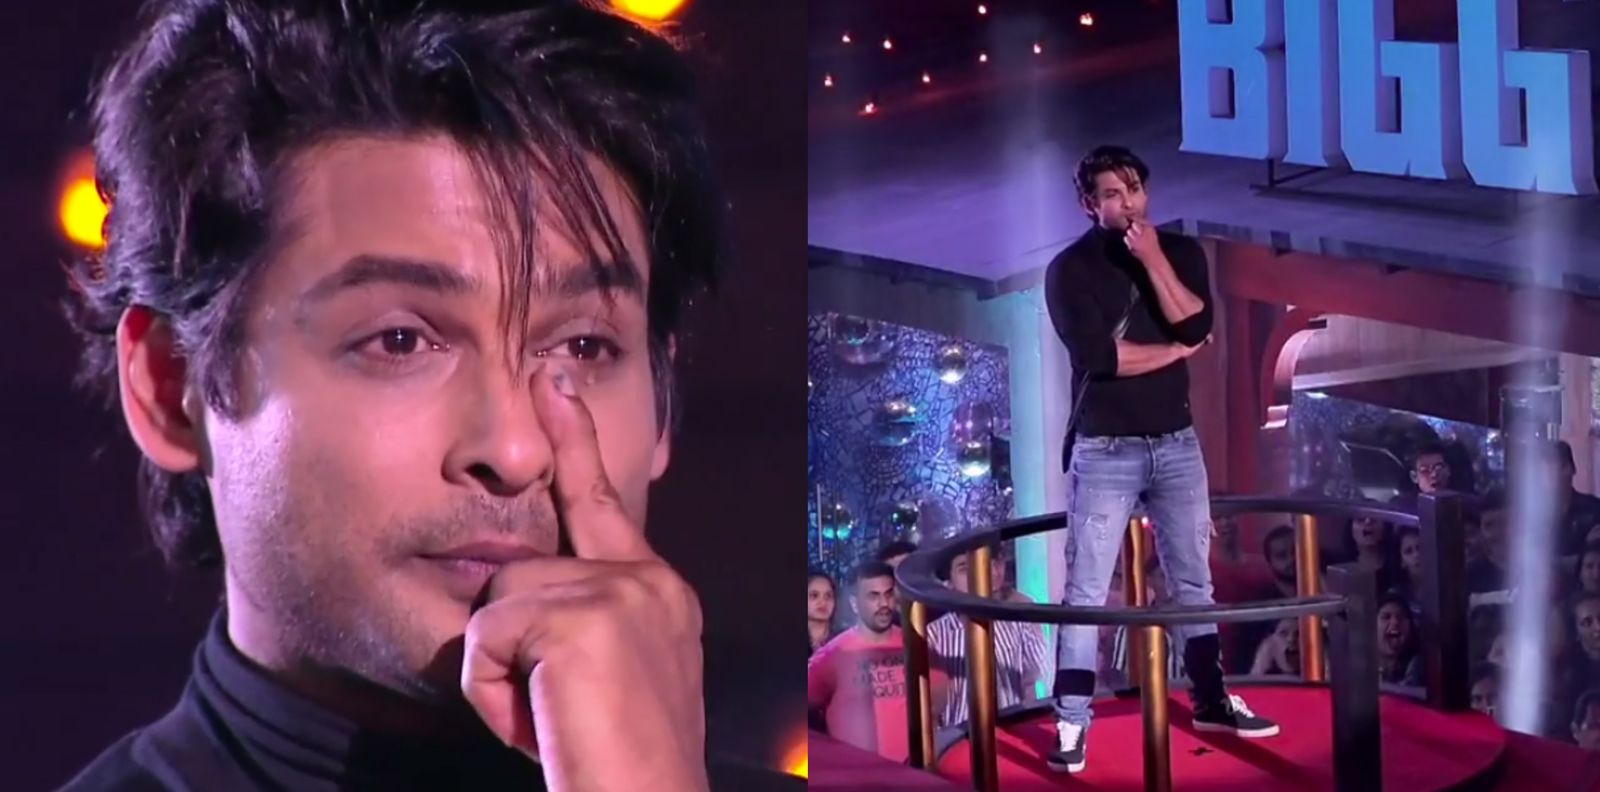 Bigg Boss 13 Preview: Sidharth Shukla Sheds A Tear As He Gets Emotional Watching His BB Journey! See Video...